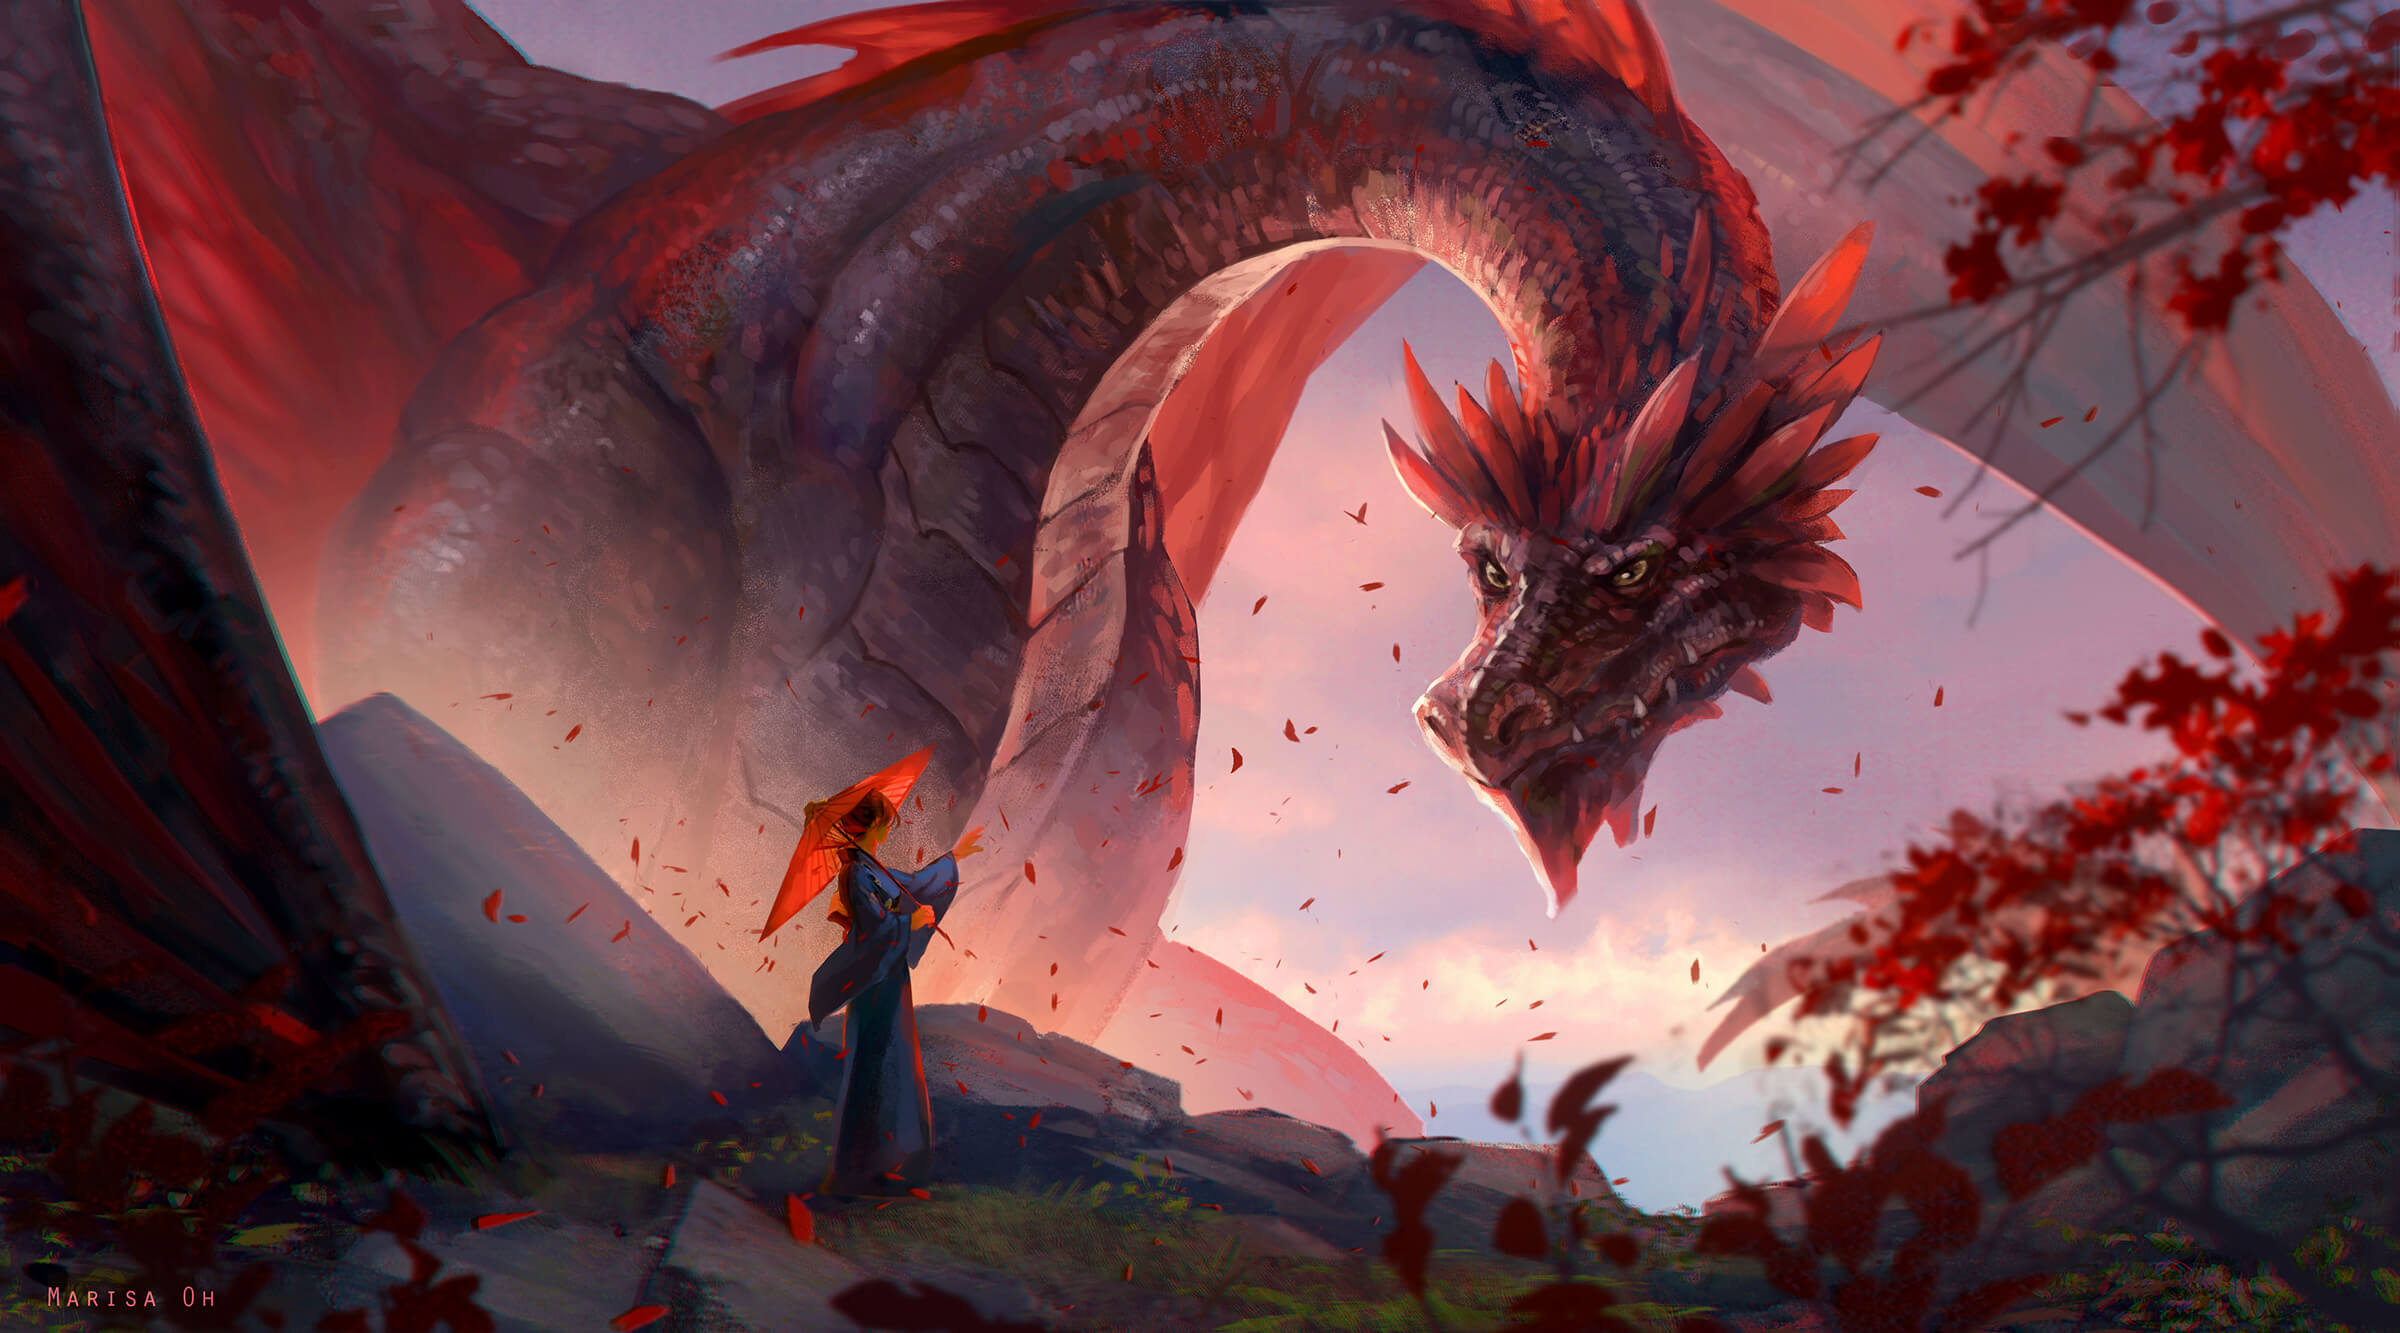 A woman holding a red paper umbrella greets a hulking red dragon at rest, its head craning to glower at her.